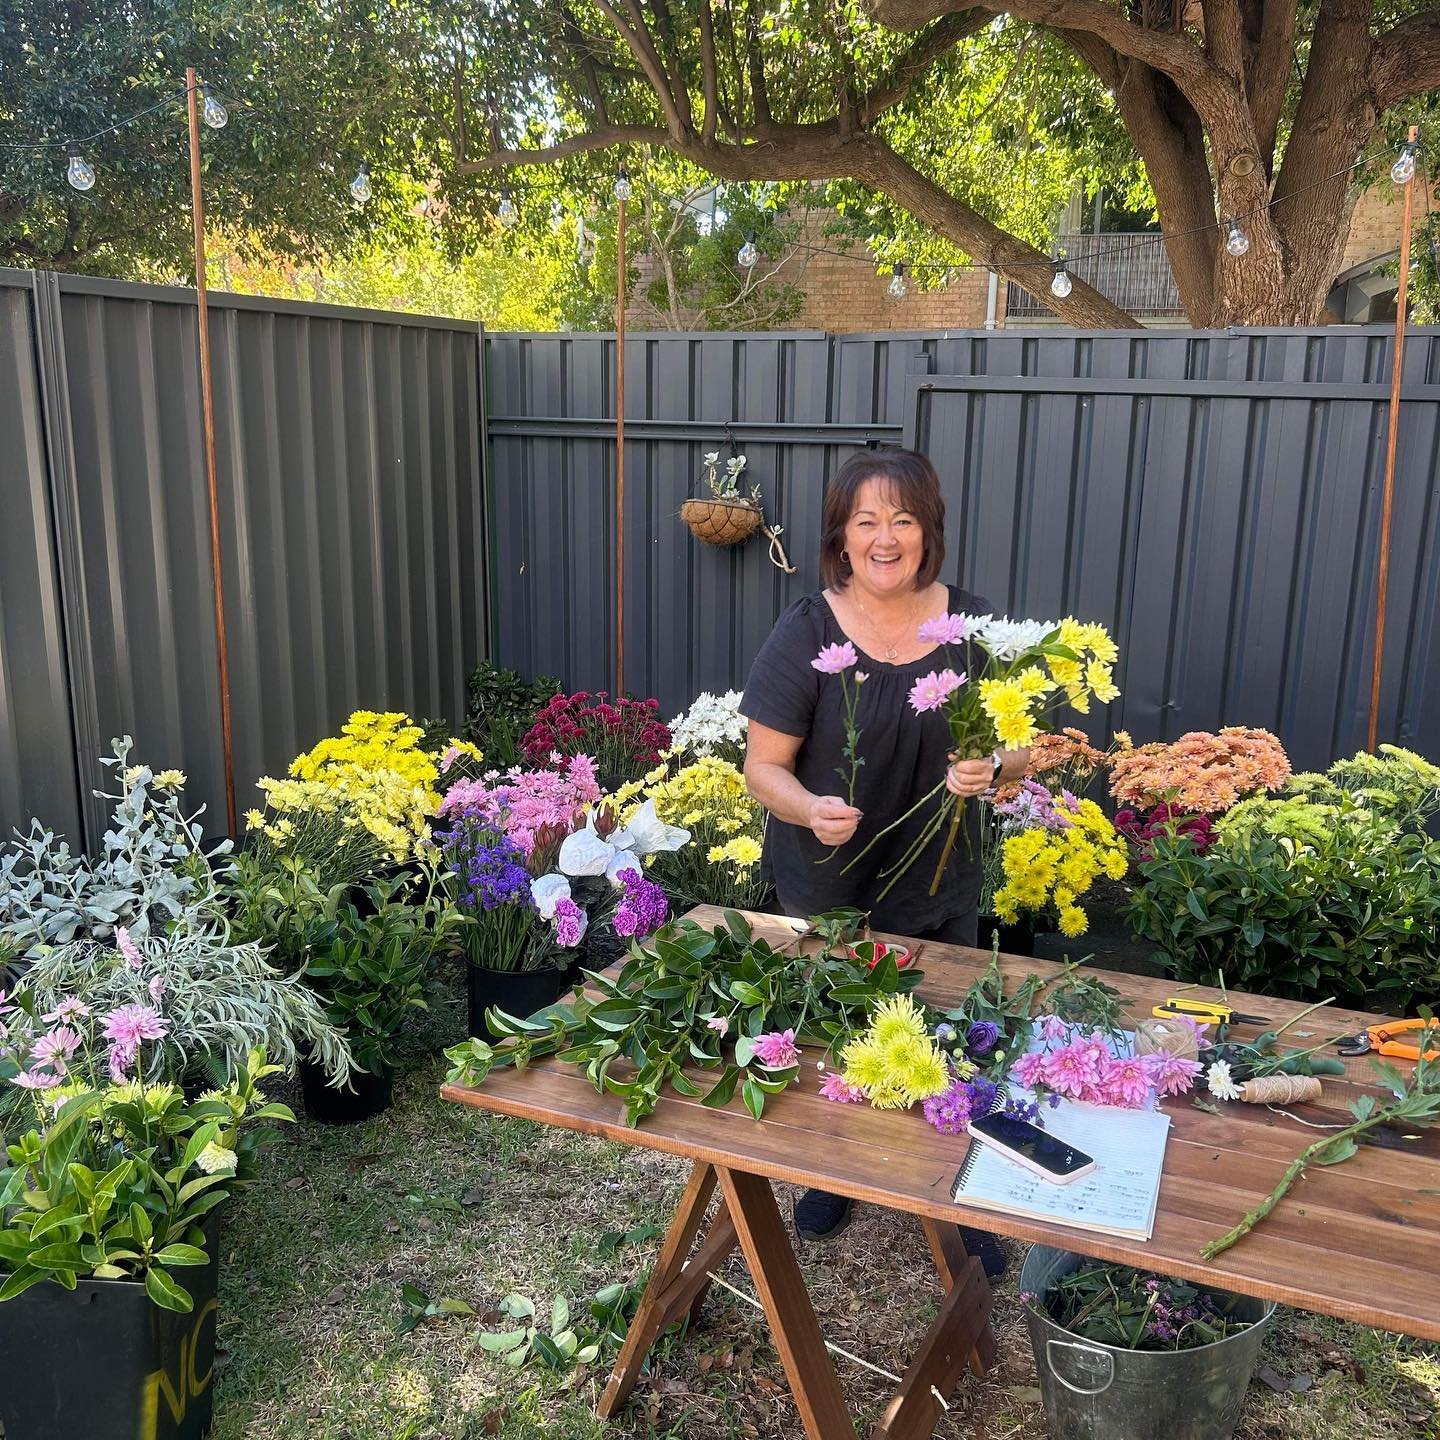 Mothers Day orders are now open for online purchases. We will have market bunches from $35 for pick up at @thejunctionfair kiosk and at our Bishopsgate St Wickham Cafe on Saturday 💐💓

Order online at www.bloomwithus.com.au